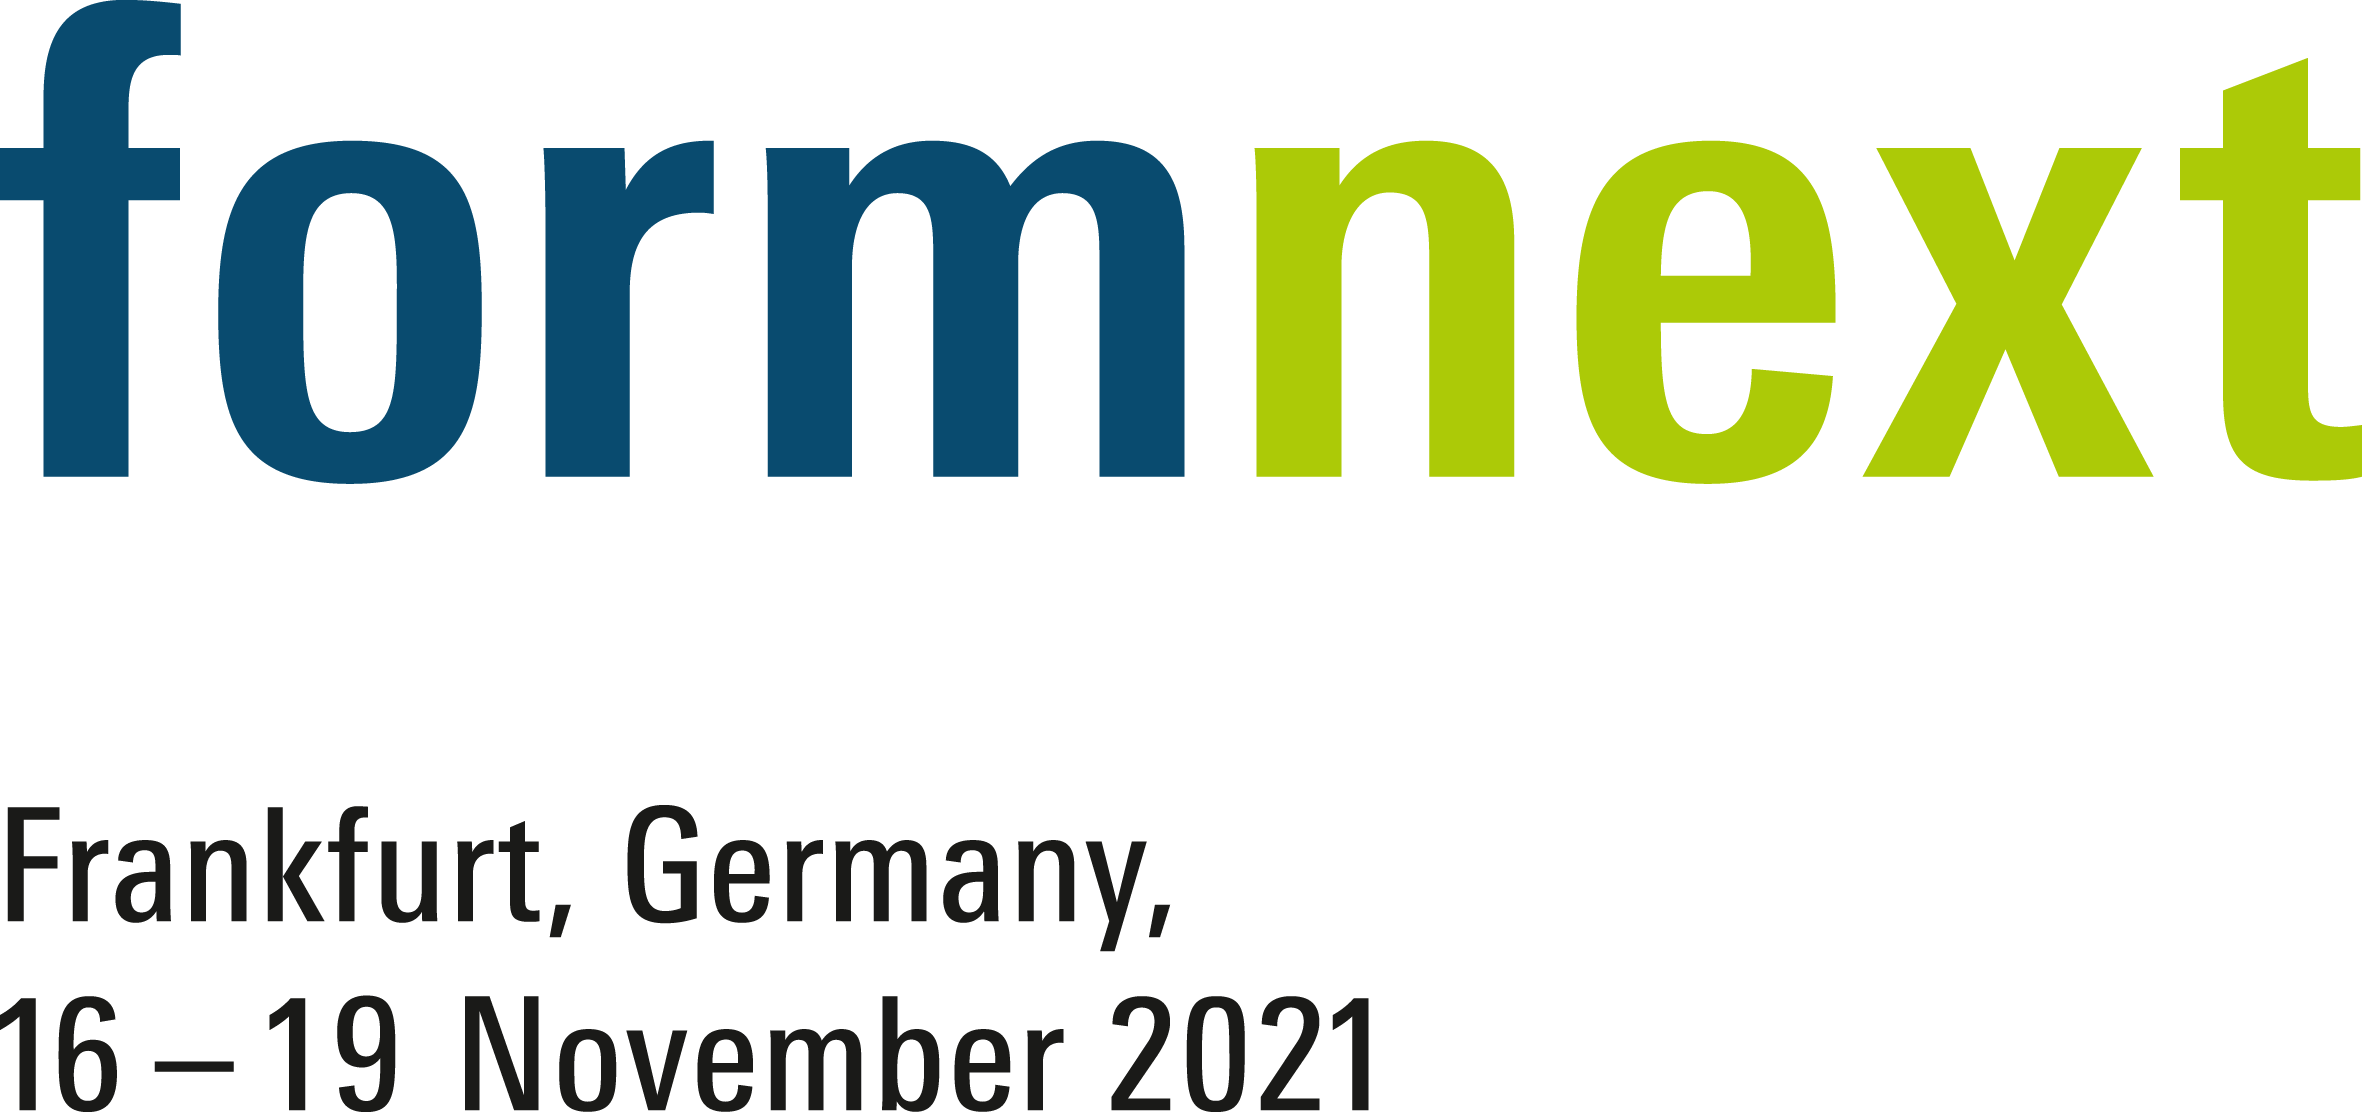 Emery Oleochemicals to Showcase Binder System for 3D Printing at Formnext 2021 Exhibition in Frankfurt, Germany